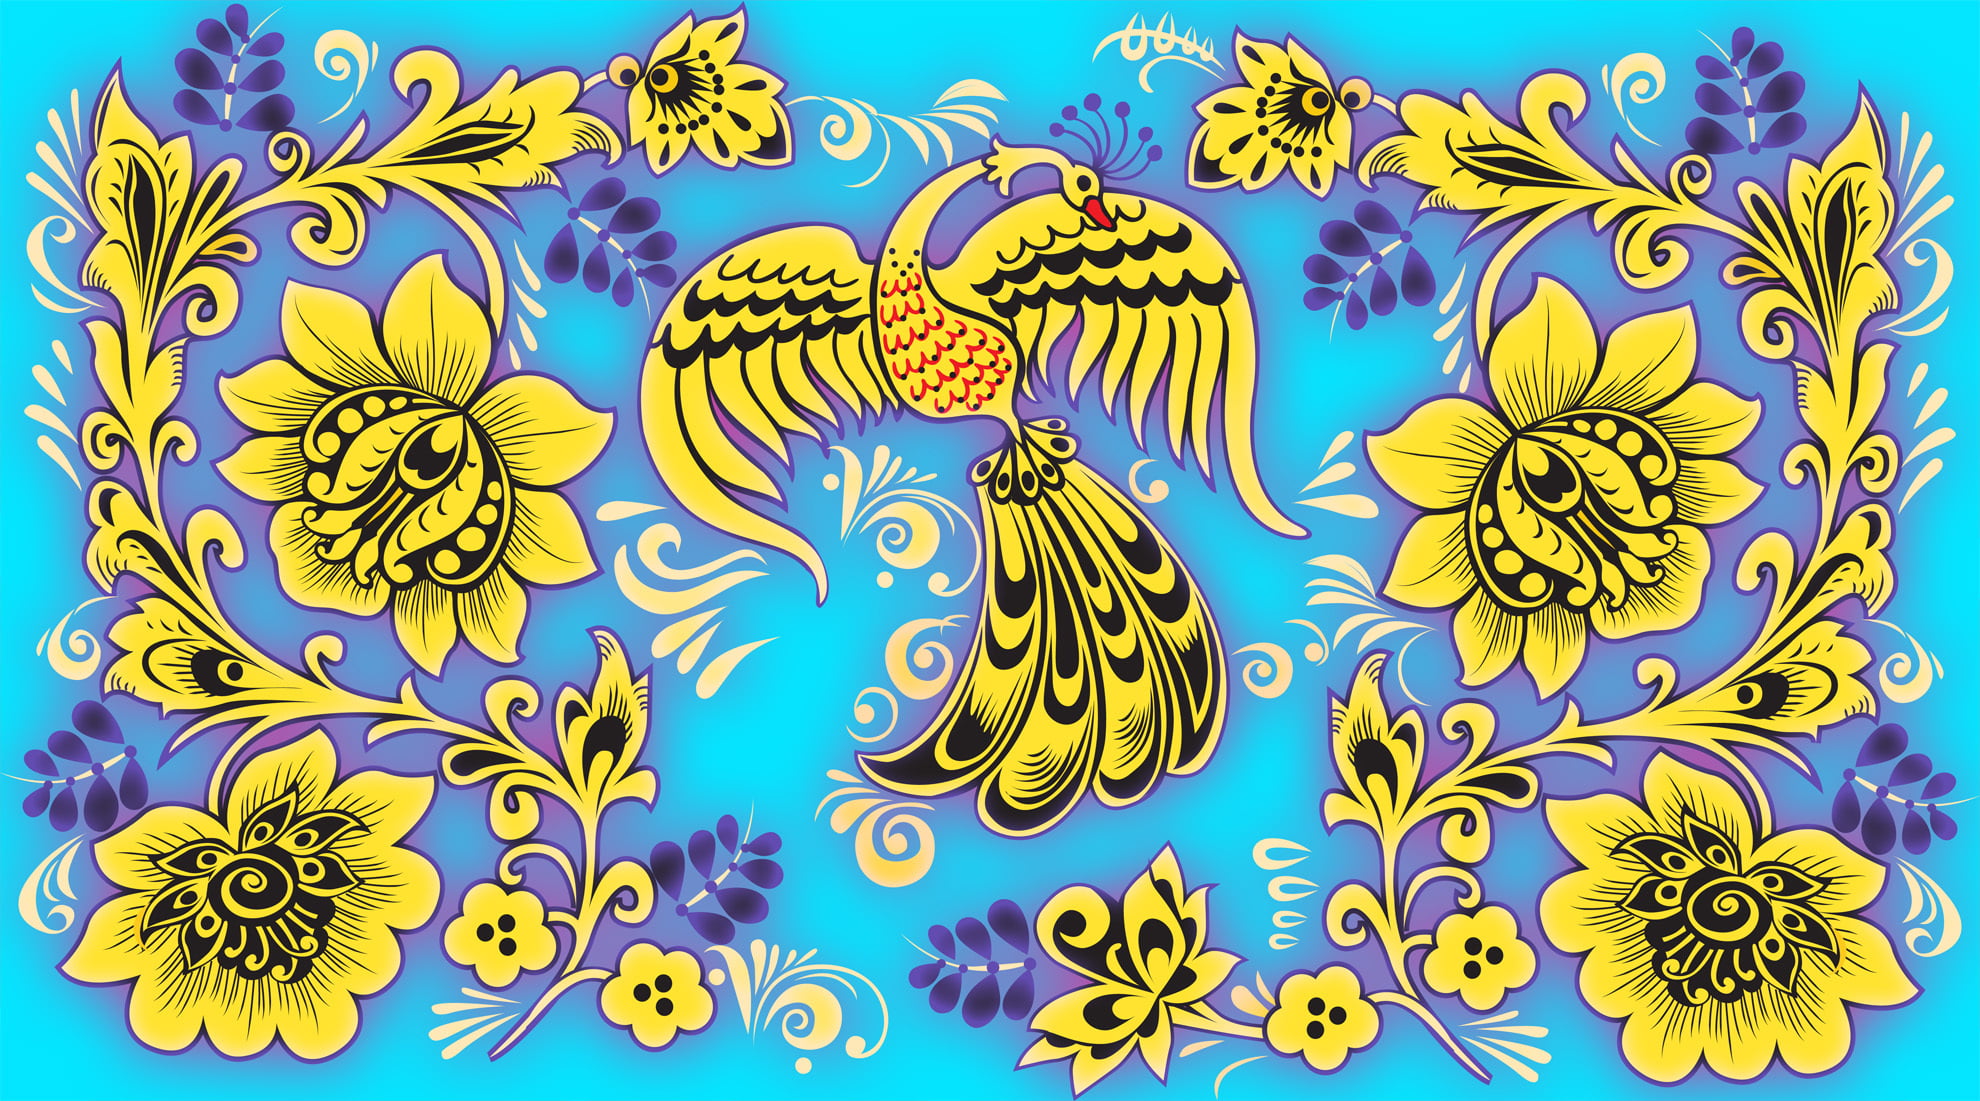 purple, teal, and yellow peacock and flowers illustration, leaves